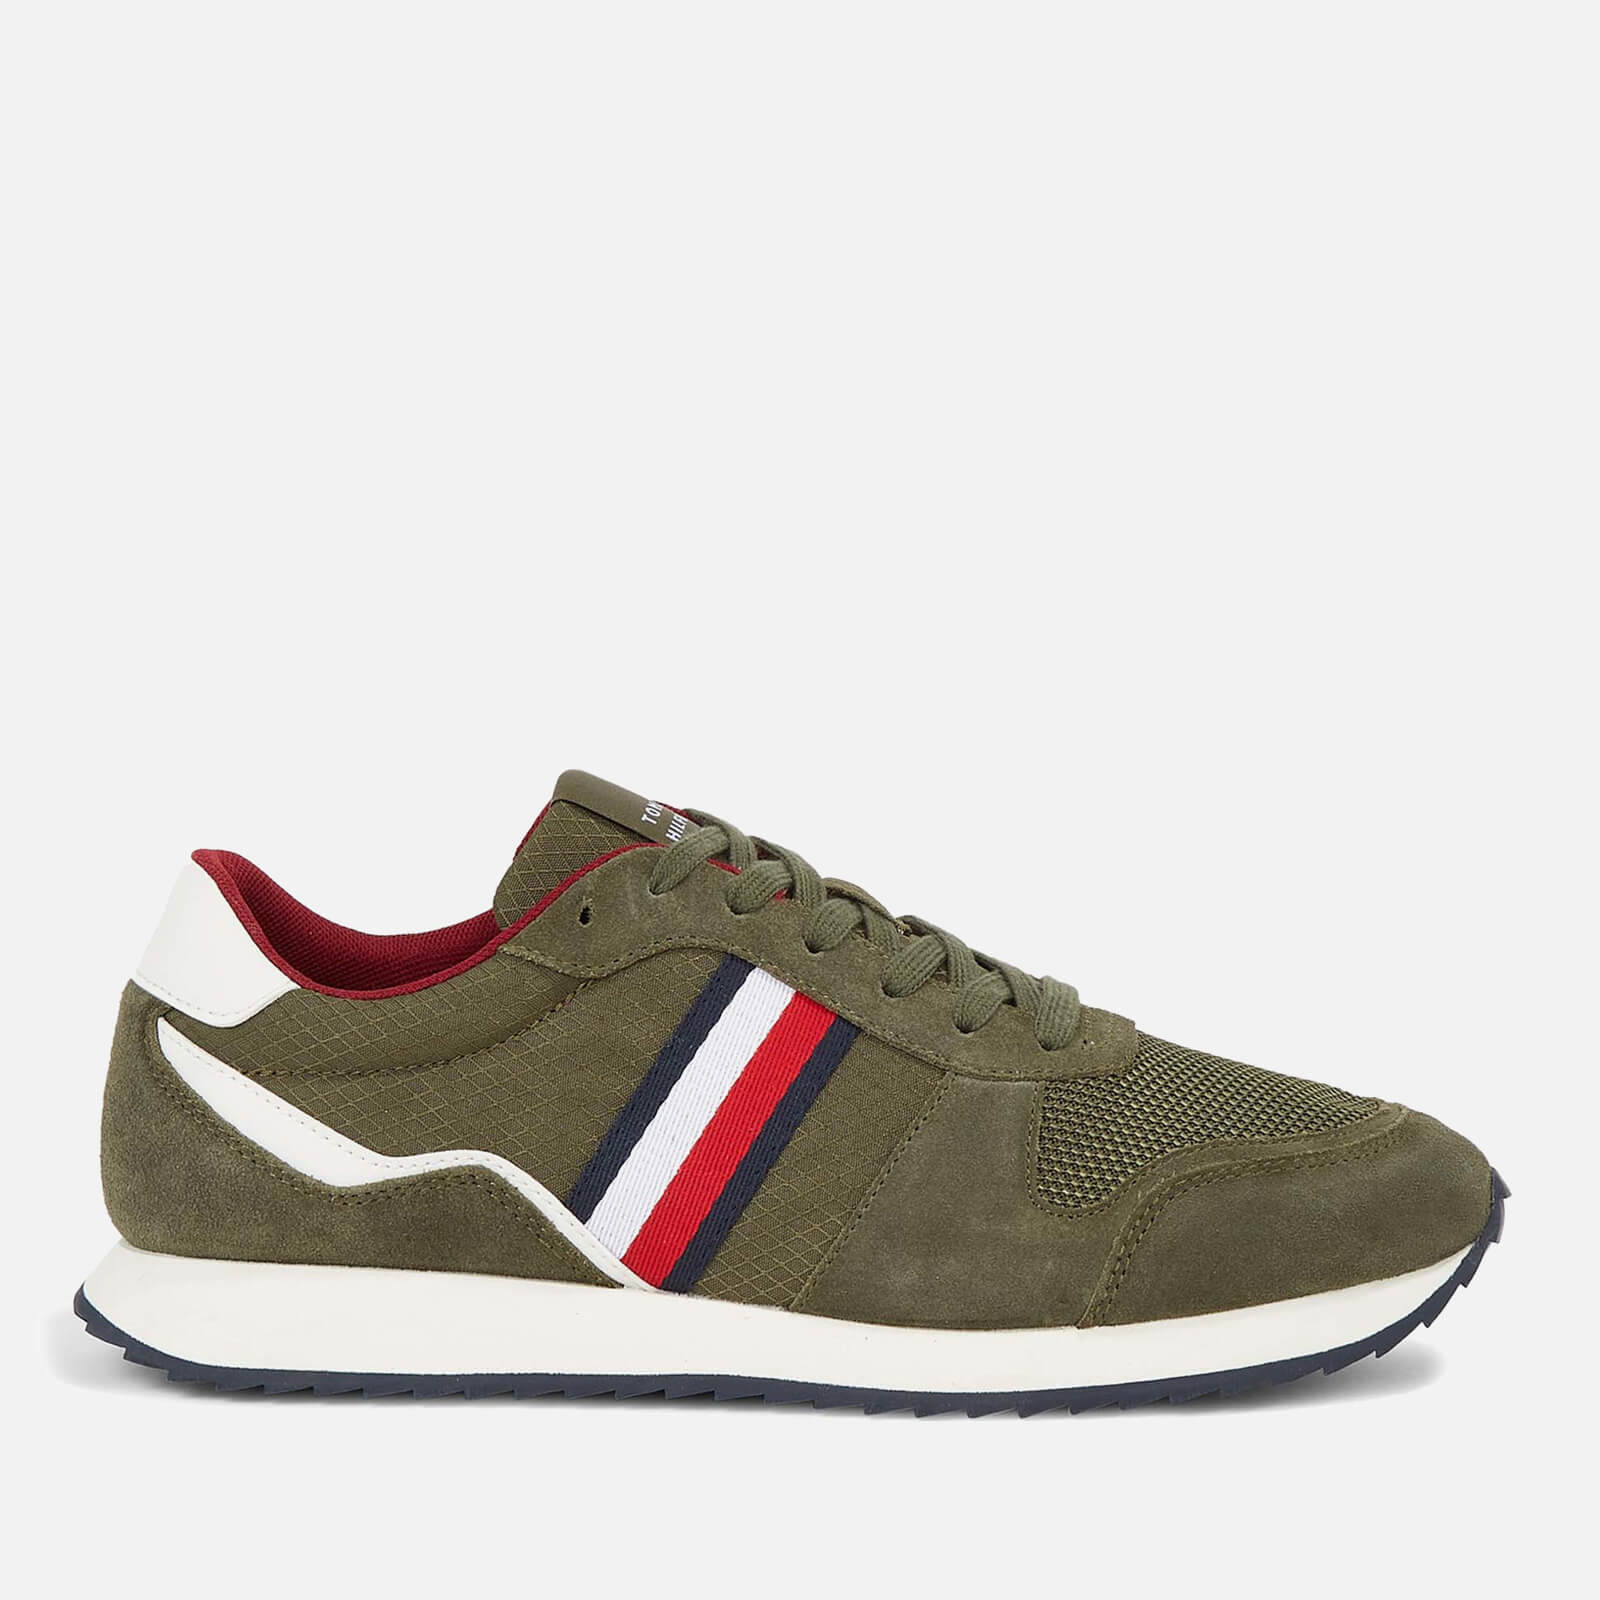 Tommy Hilfiger Men’s Evo Mix Suede and Ripstop Trainers